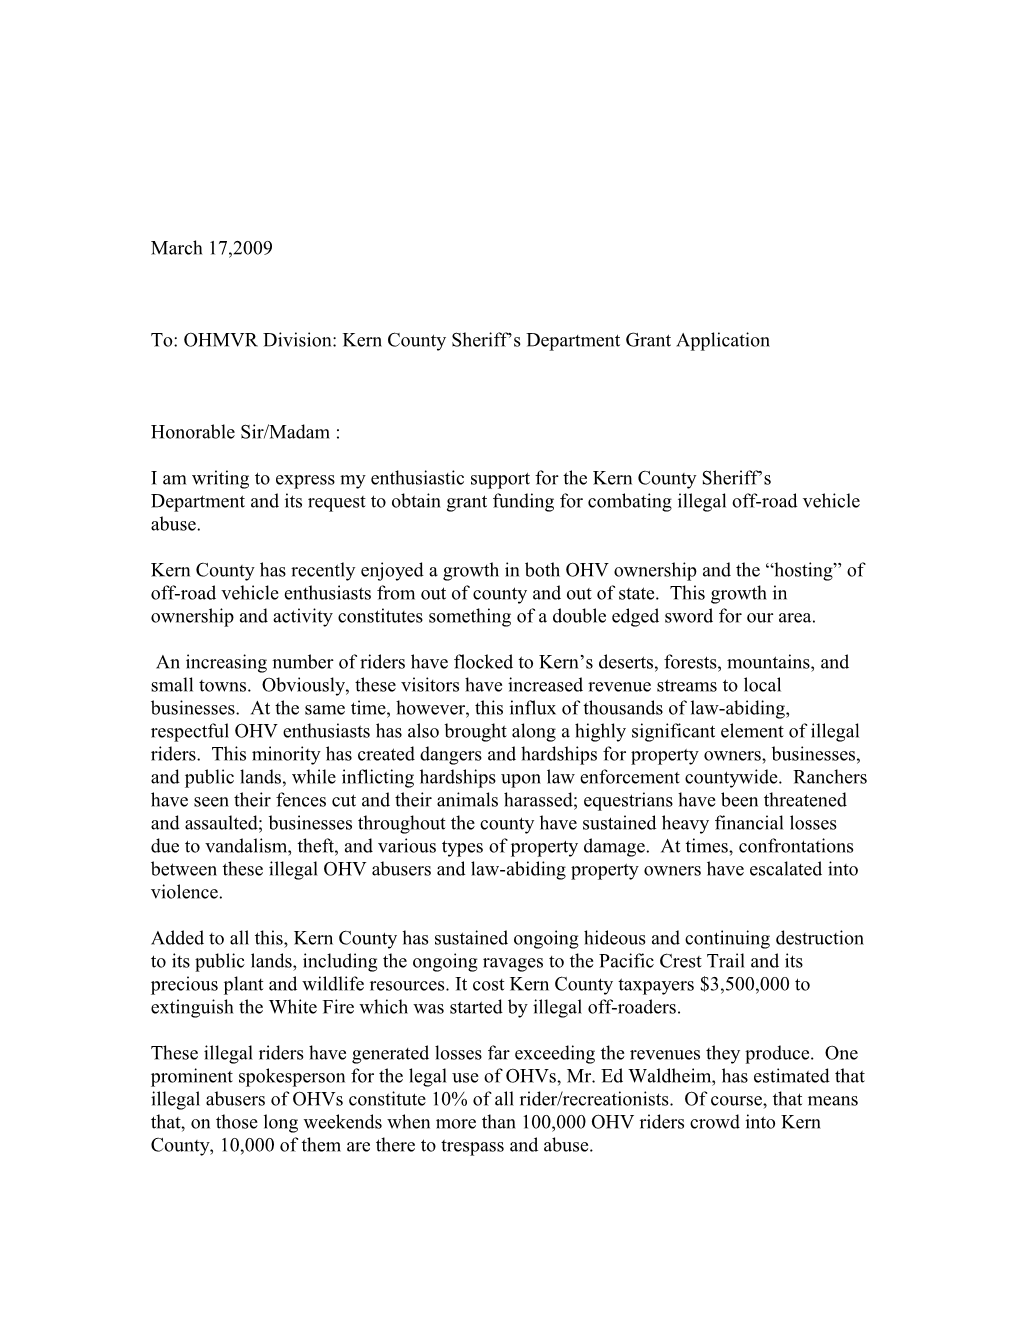 To: OHMVR Division: Kern County Sheriff S Department Grant Application